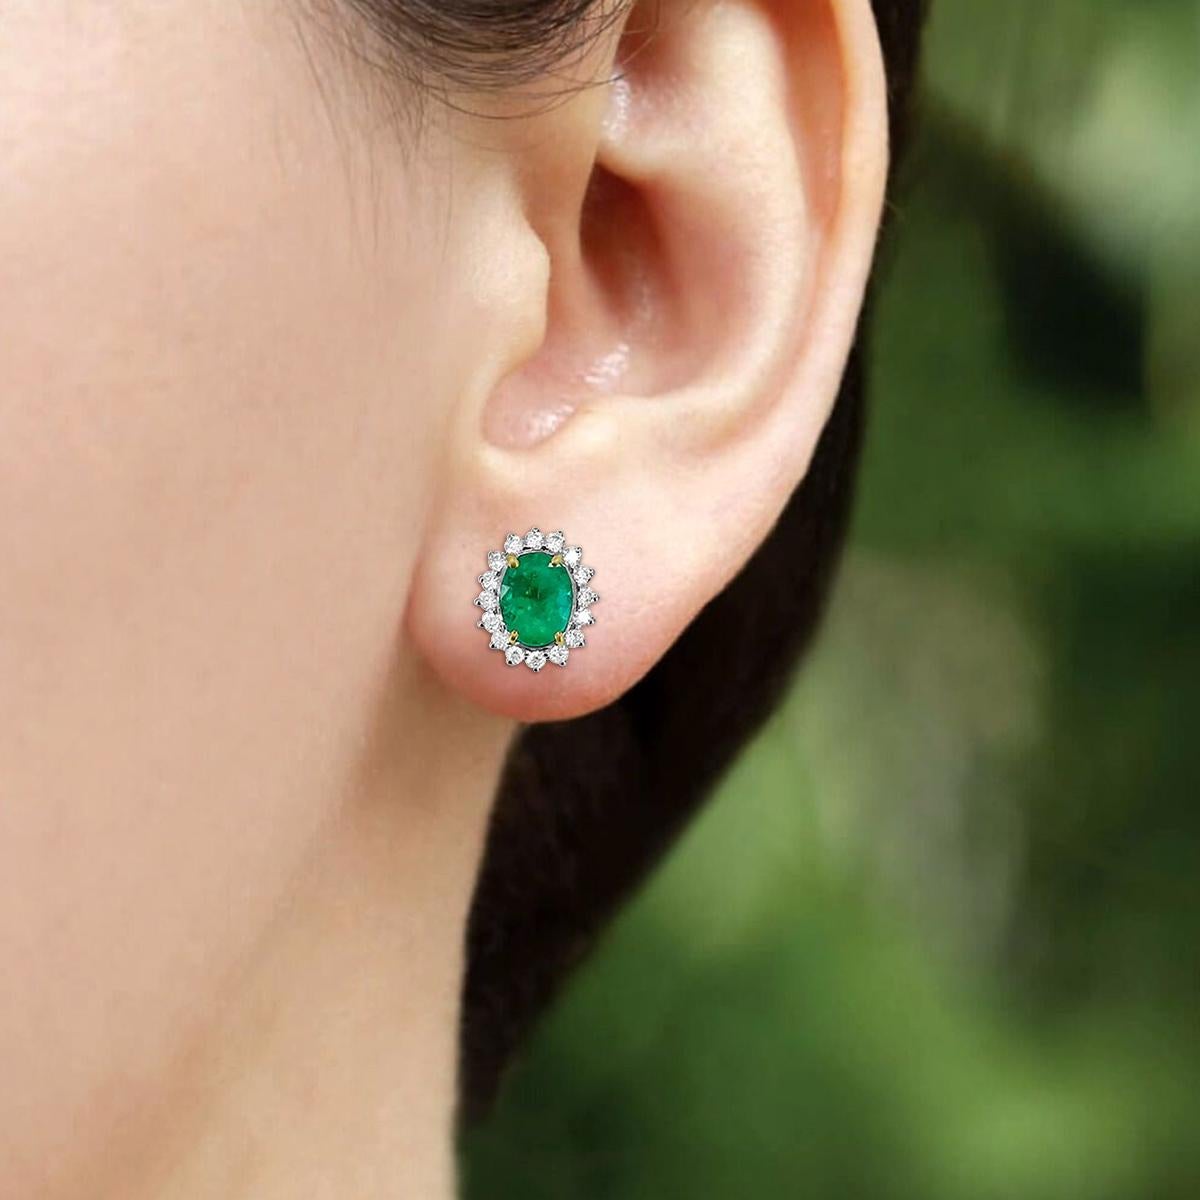 Oval Cut 18K White Gold 2.64cts Emerald and Diamond Earring. Style# TS8128E For Sale